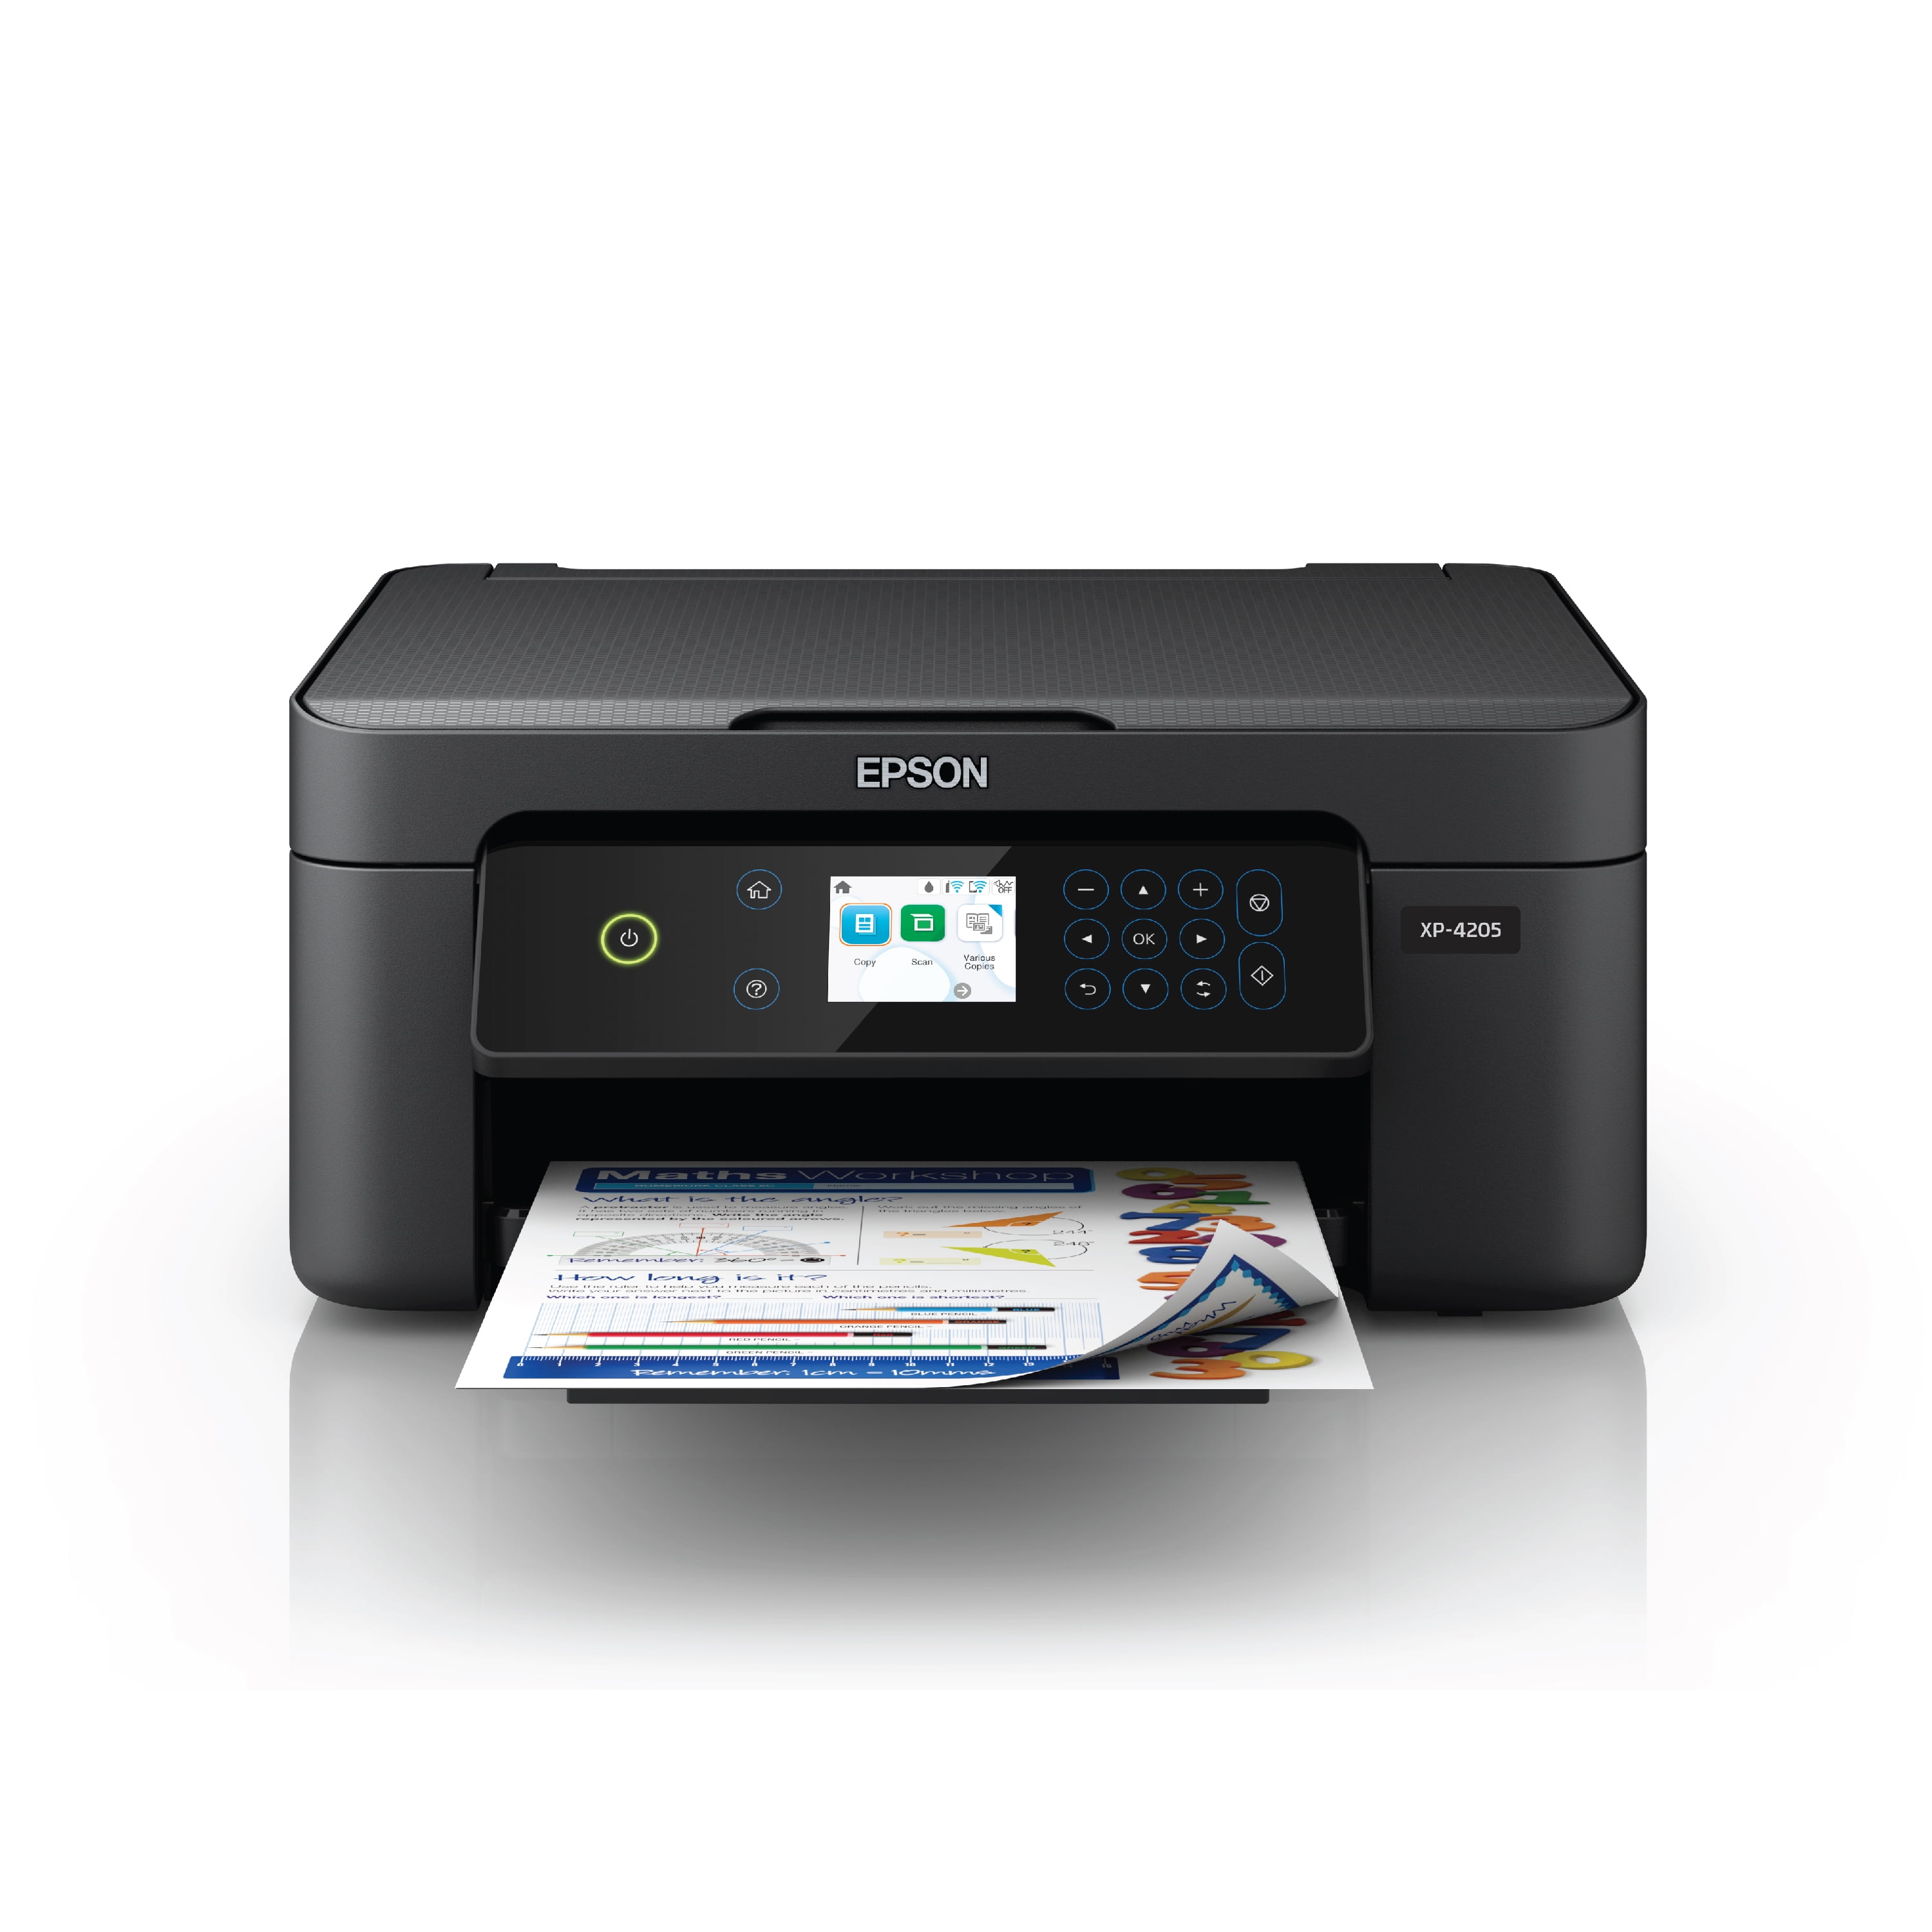 Epson Expression Home XP-4205 Wireless Color Printer with Scanner -